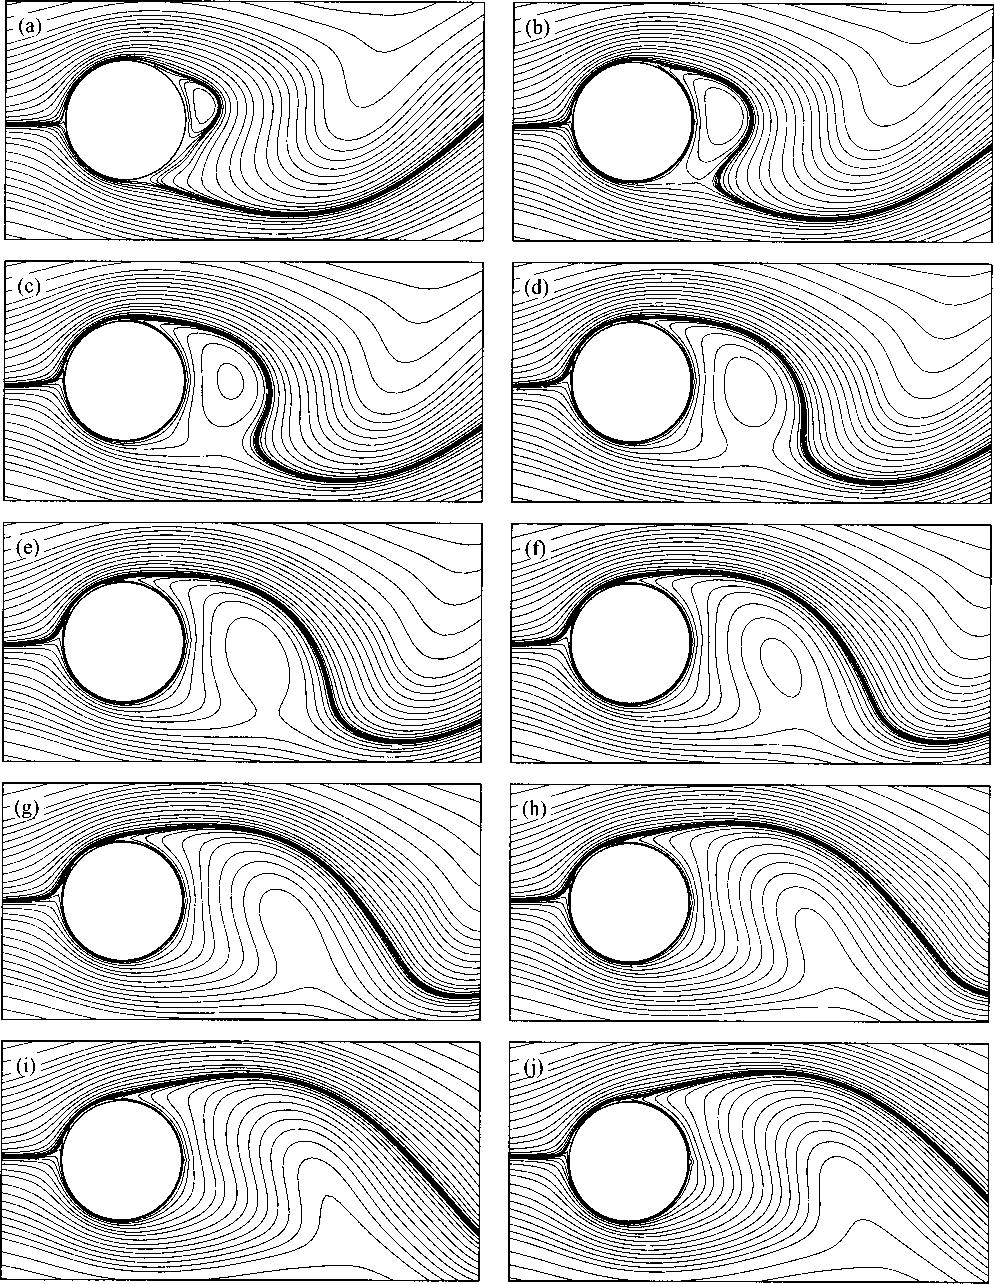 Phys. Fluids, Vol. 10, No. 4, April 1998 S.-J. Baek and H. J. Sung 873 FIG. 7. Instantaneous pressure distributions at S f 0.140 and max 30. a 0.05T, b 0.15T, c 0.25T, d 0.35T, and e 0.45T.